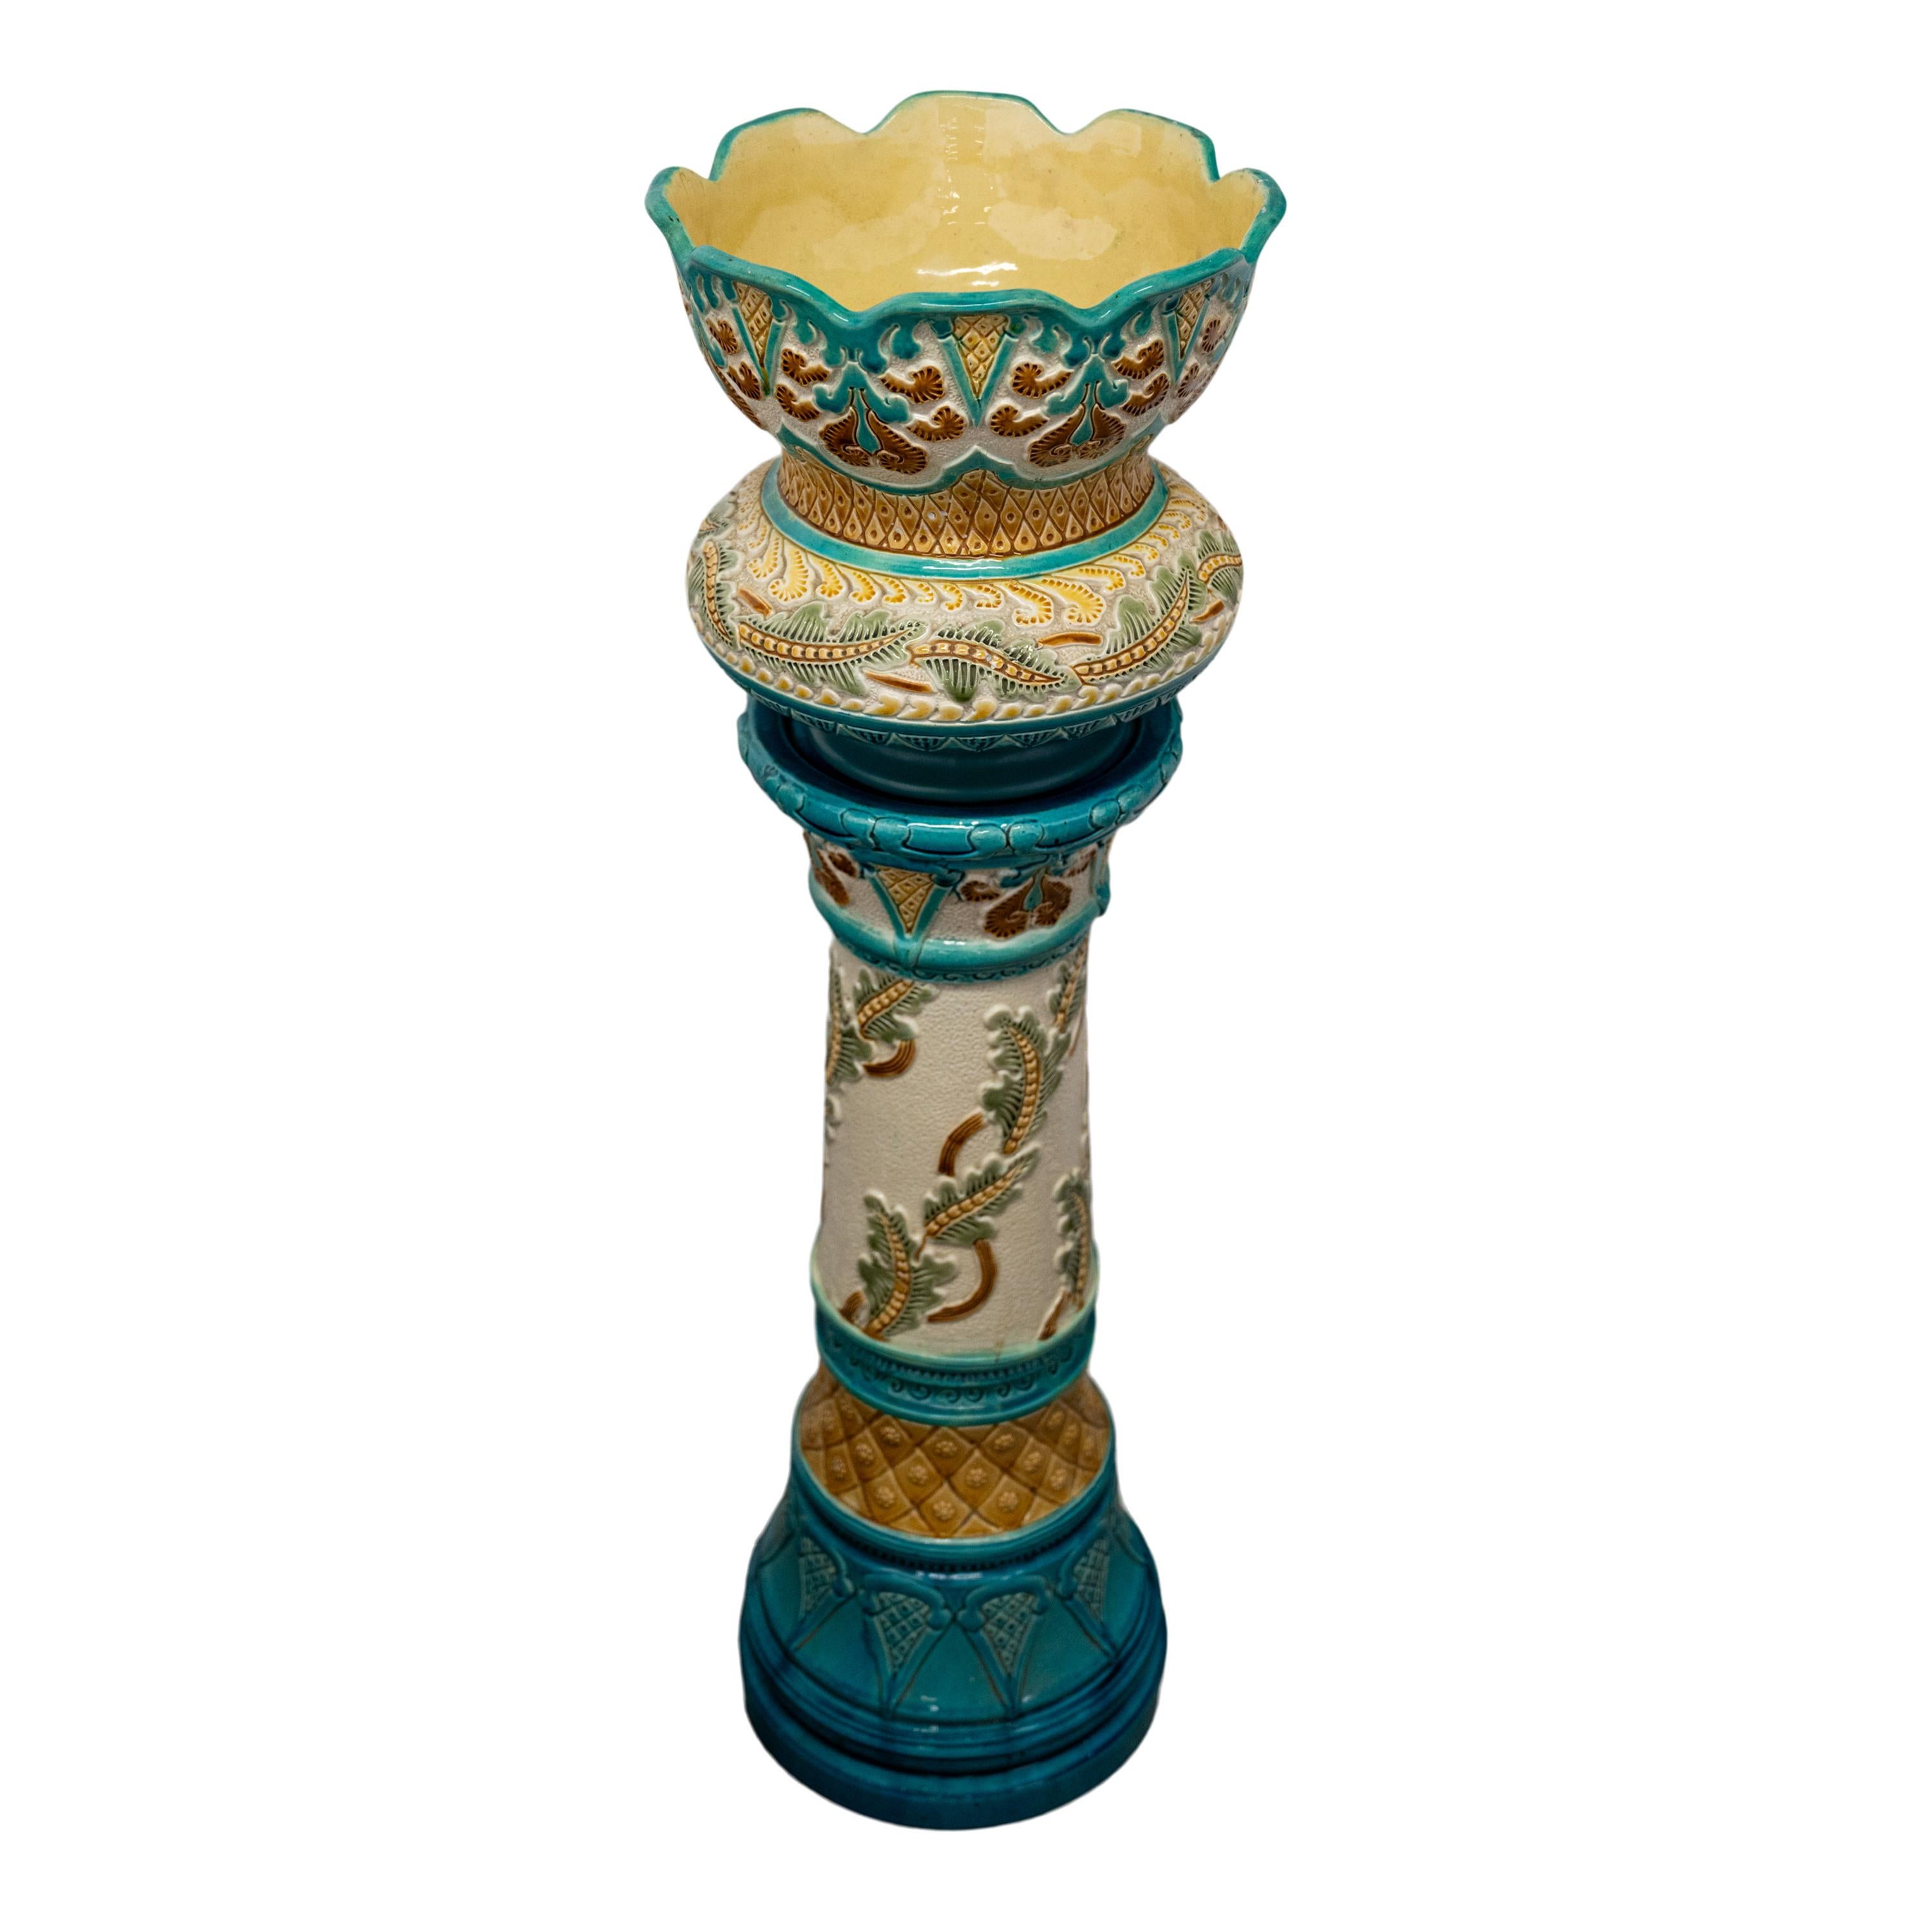 A very handsome Art Nouveau faience pottery jardiniere and Stand, Burmantofts Pottery, circa 1895.
The jardiniere and stand having multi-color glaze and Art Nouveau floral decoration, the base of the jardiniere having incised marks for Burmantofts